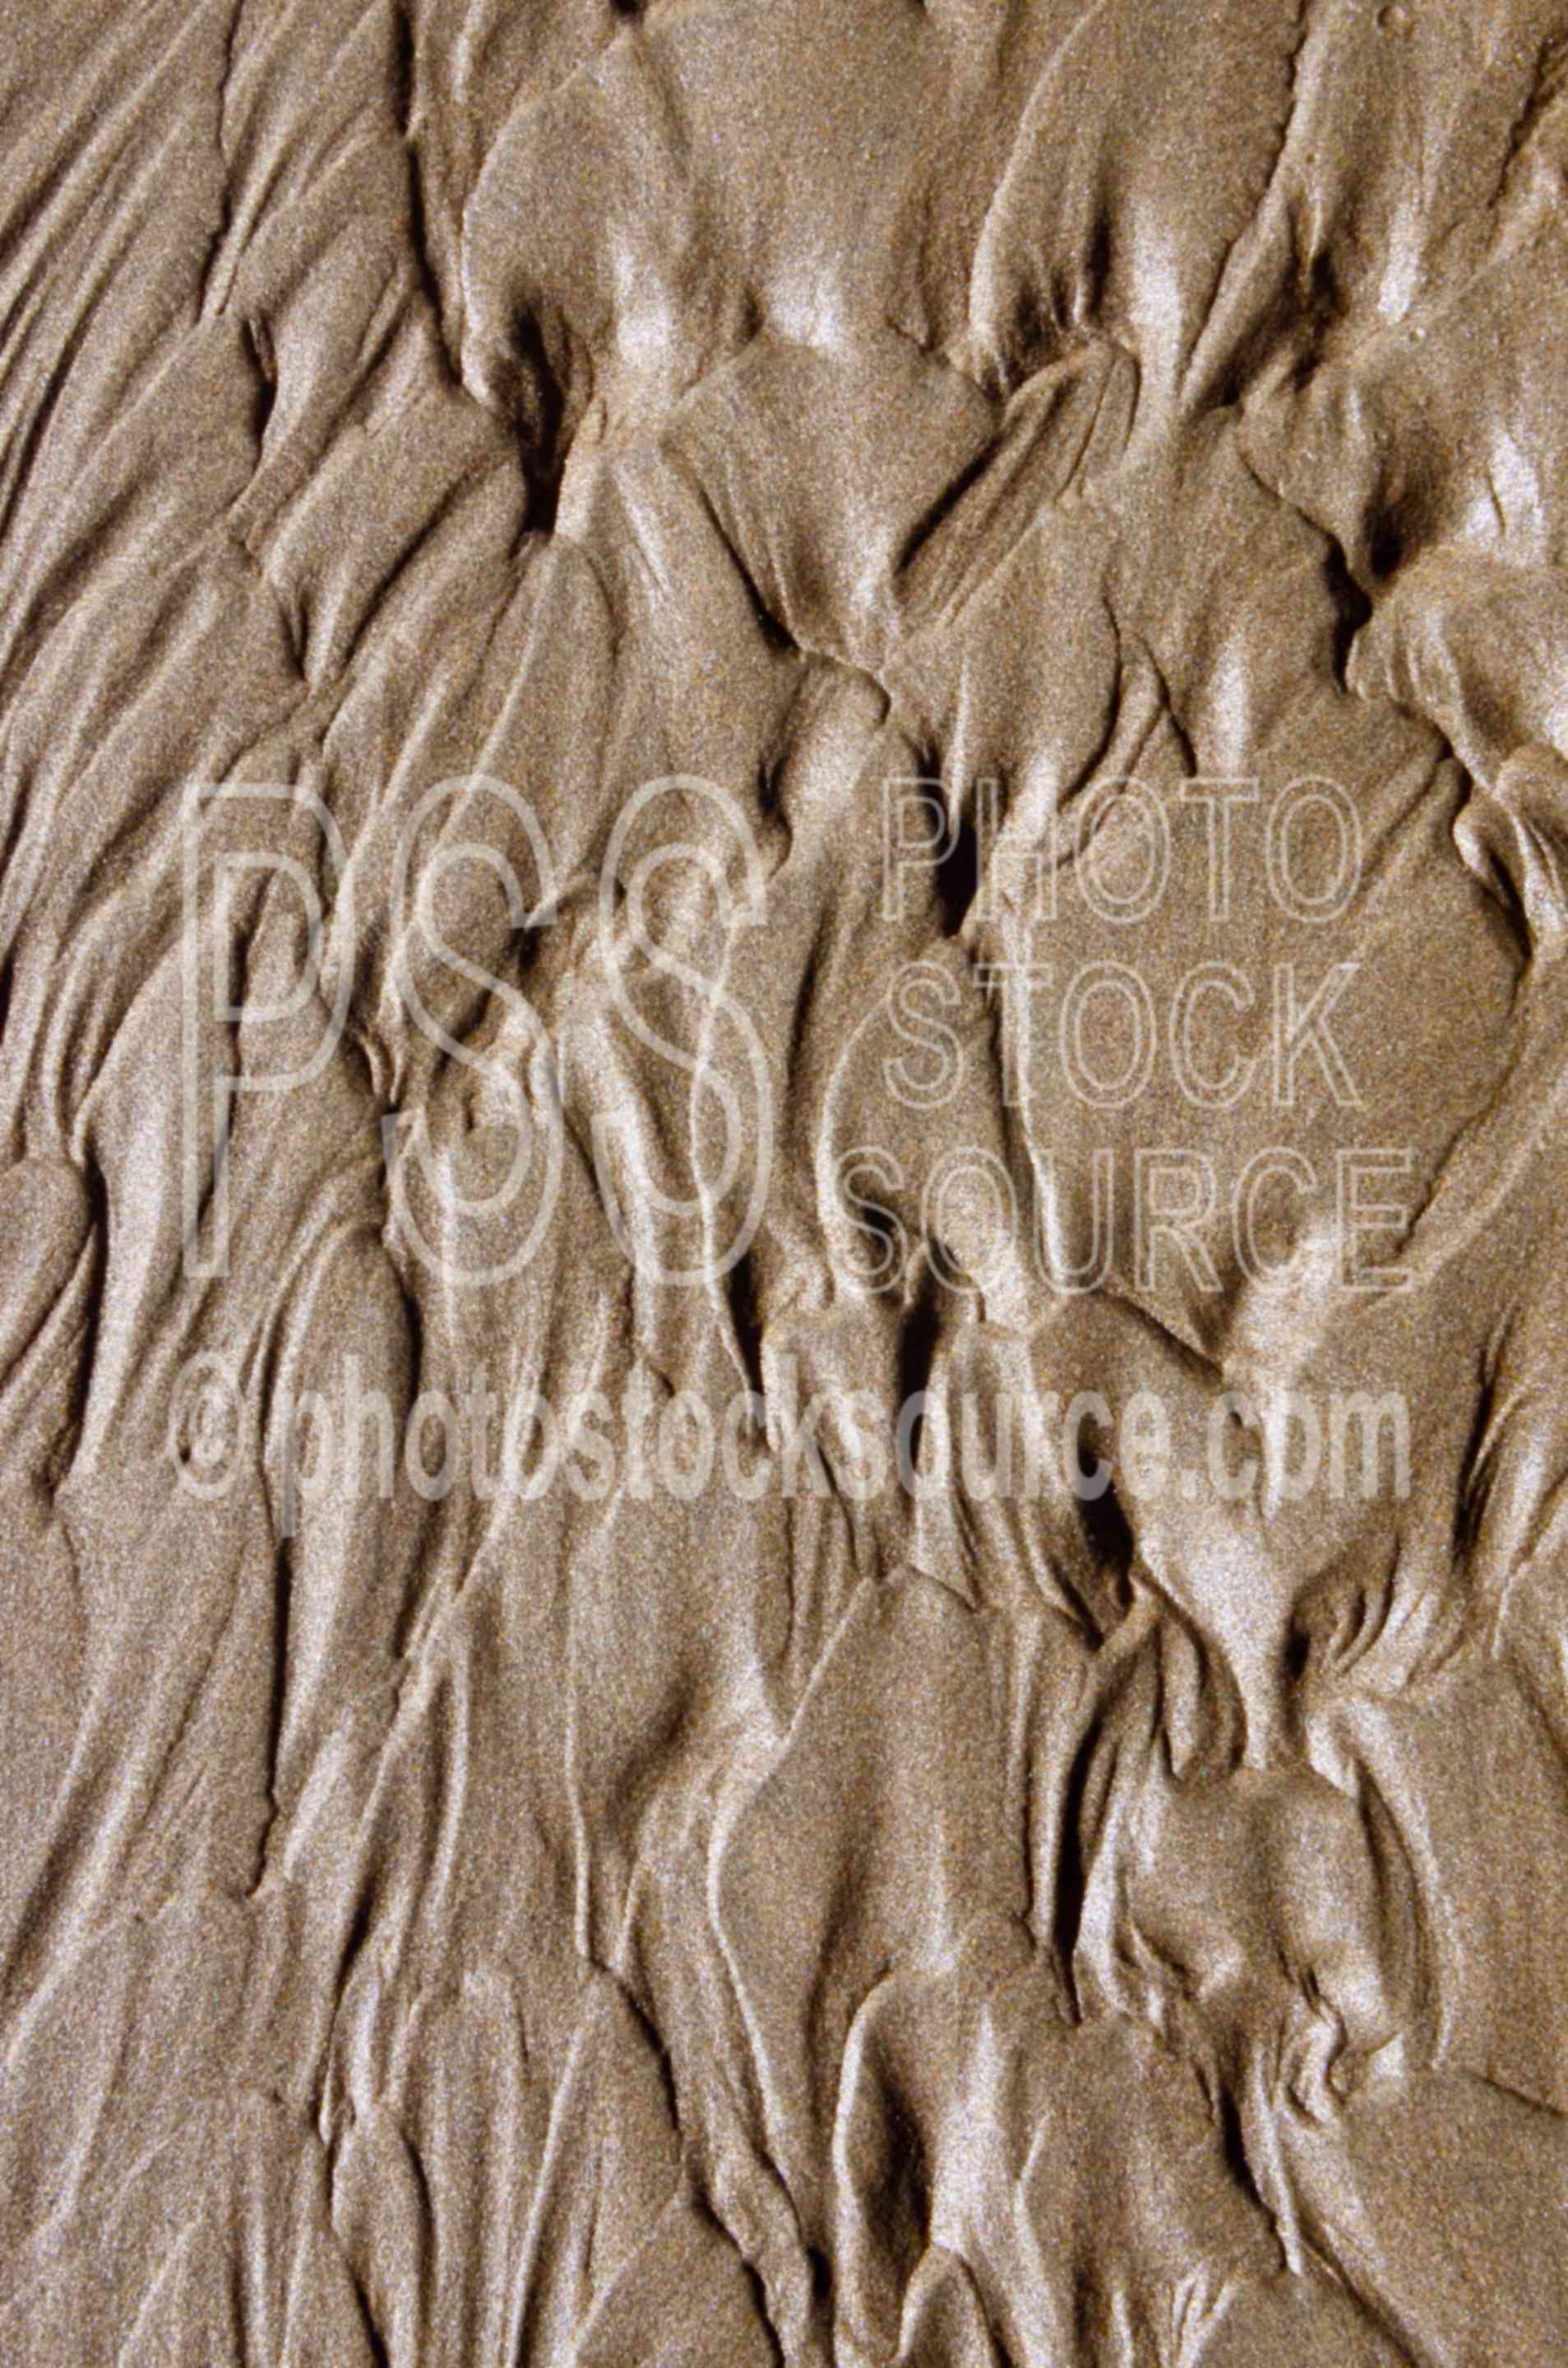 Patterns in Sand,sand,beach,patterns,abstract